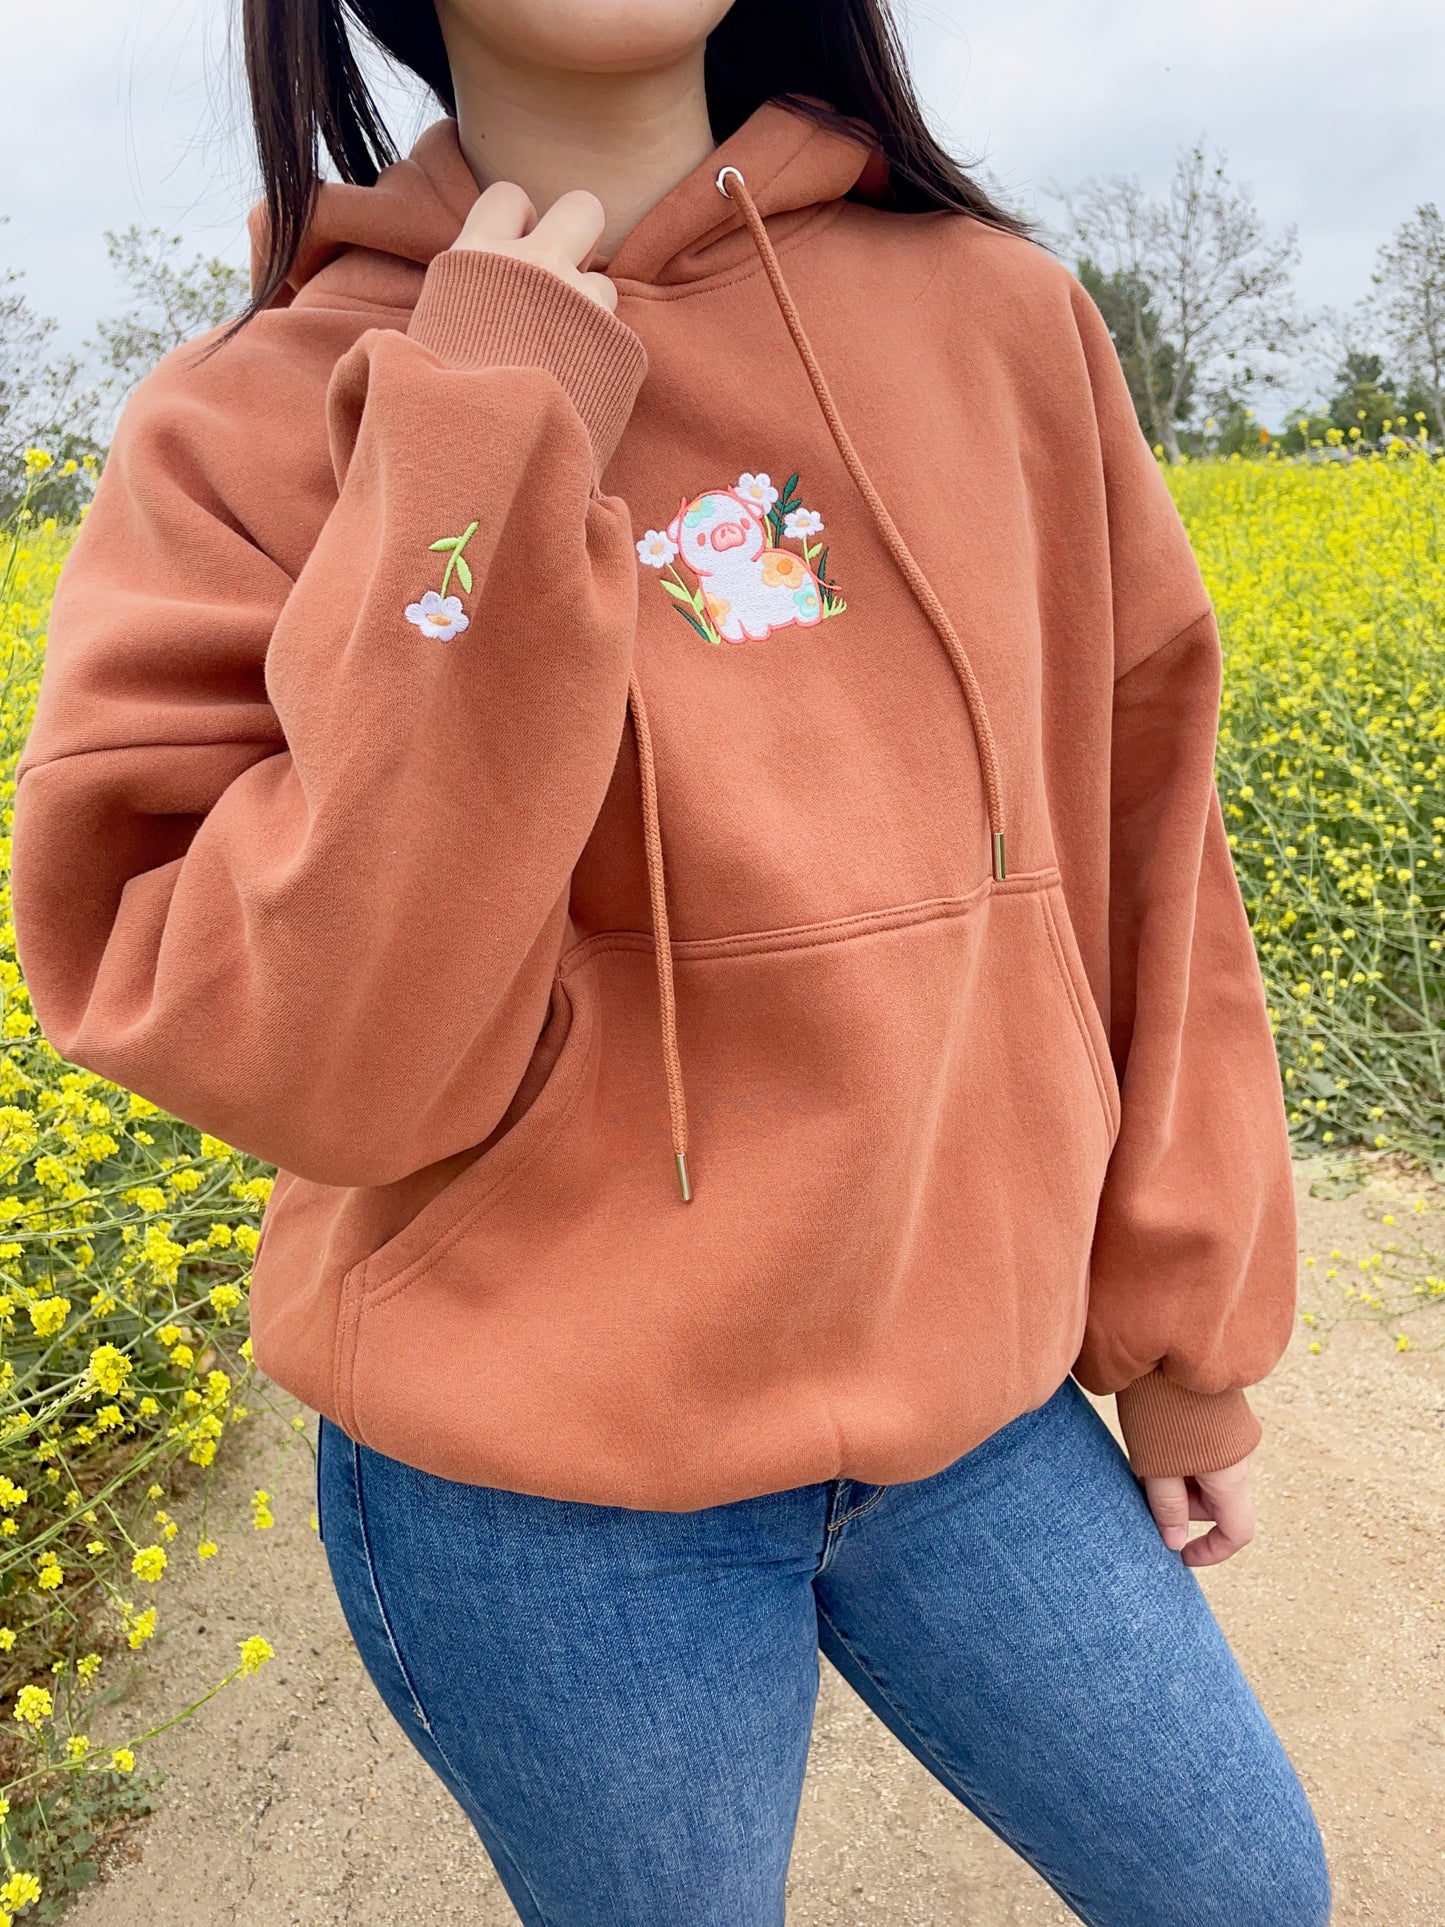 Blossom the Calf - Embroidered Hoodie (Unisex Sizes XS - 2XL)